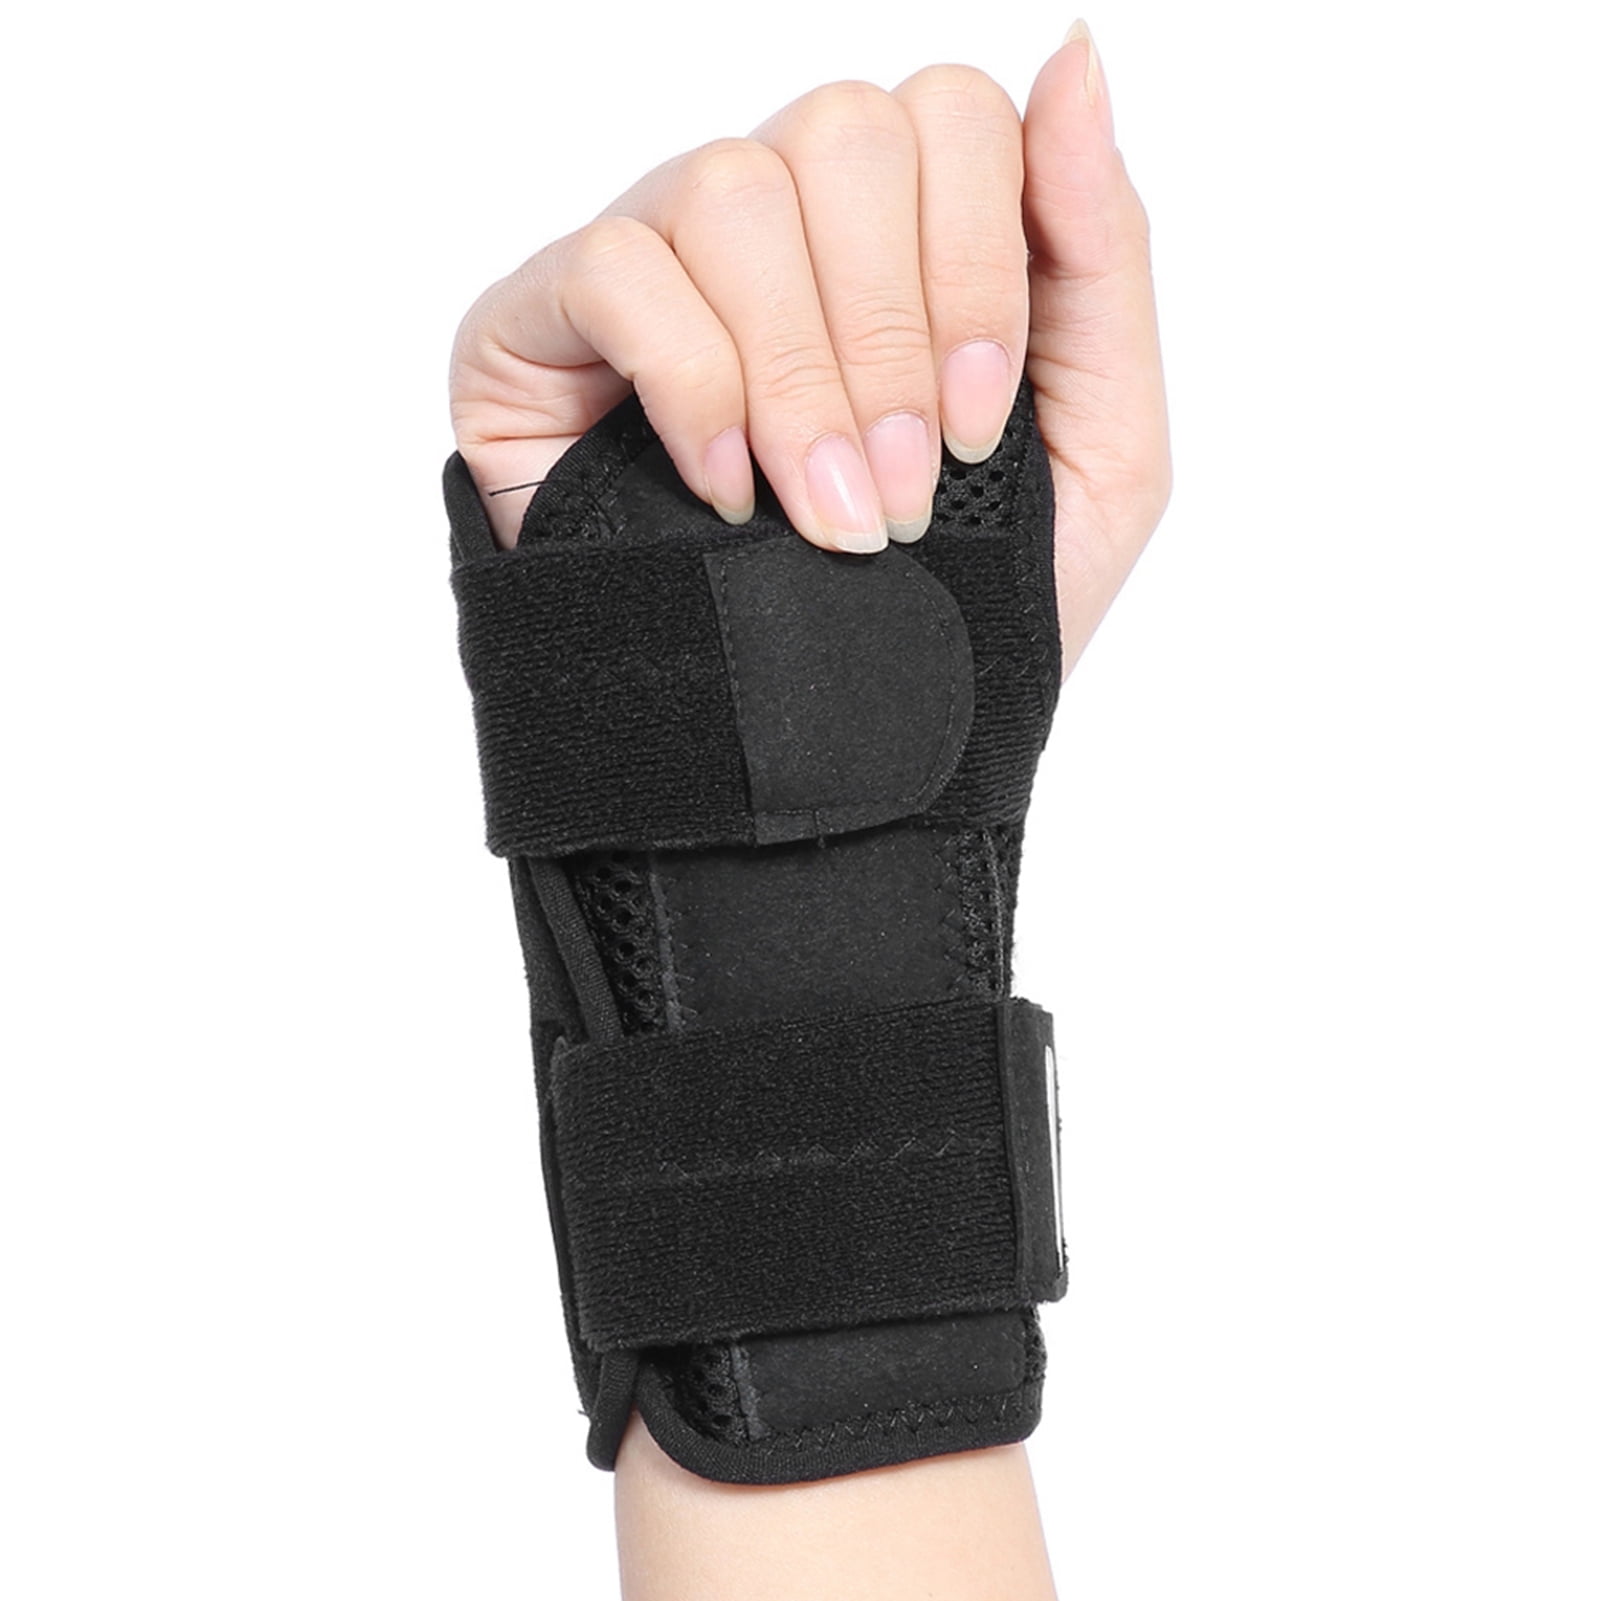 Fracture Wrist Protection， Ligament Injury Wrist Brace ， Universal For ...